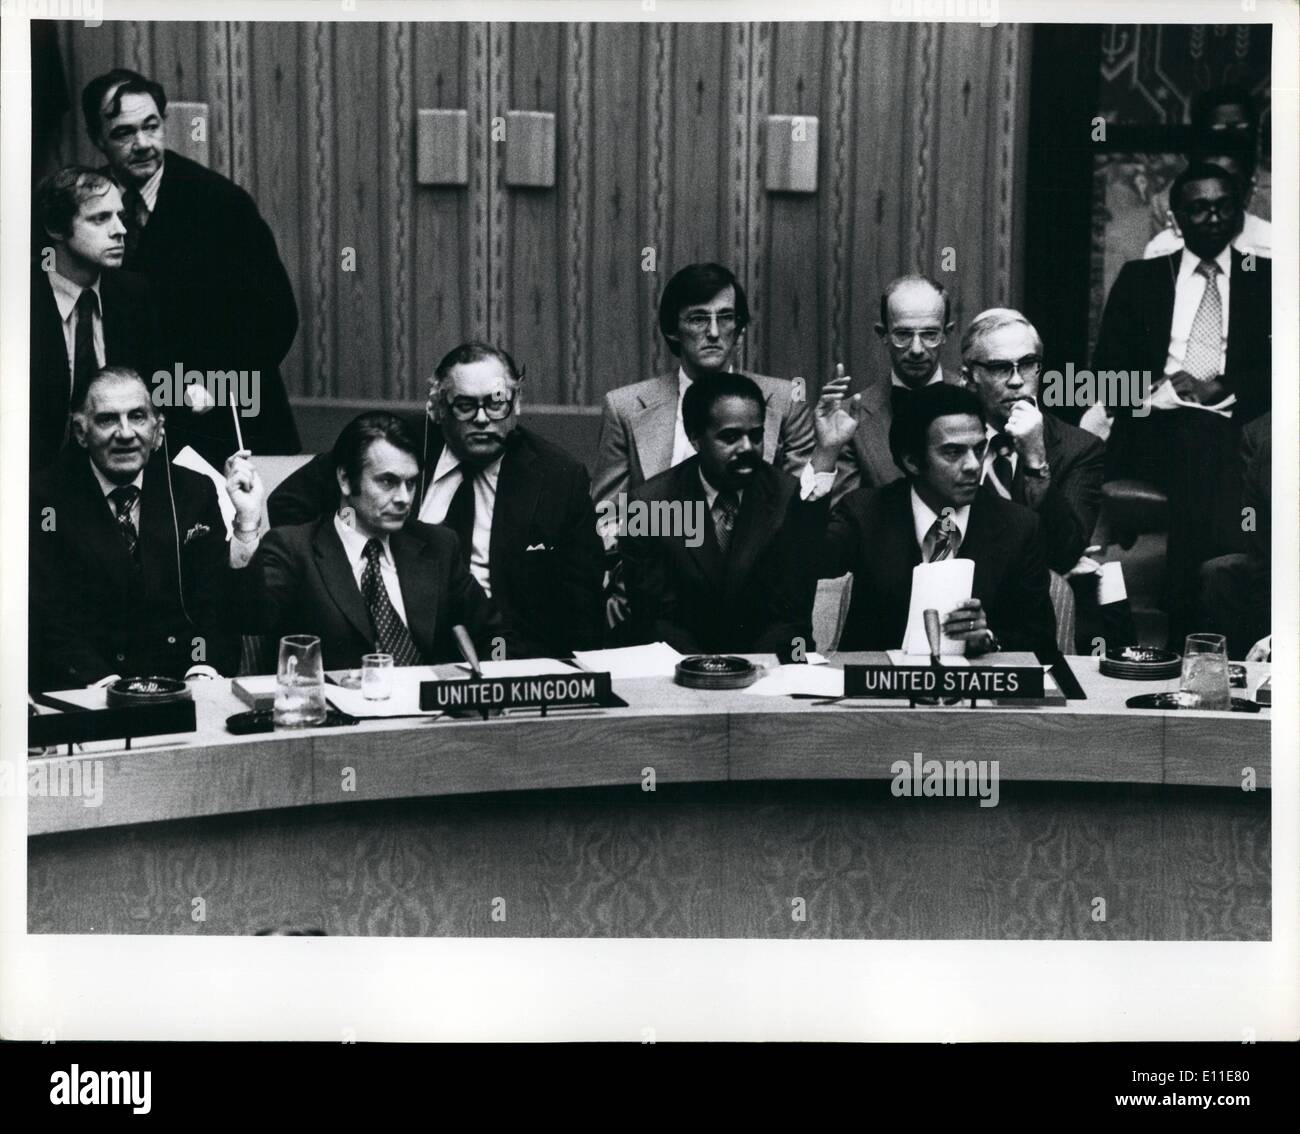 Sep. 09, 1977 - UN Security Council on Rhodesia: The UN security Council approved a resolution jointly proposed by the UK and US to request the Secretary General to send a UN Observer as a representative to Rhodesia to enter into discussion with the British Resident Commissioner designate and all parties concerning military & associated arrangement for majority rule. David Owen - Andrew Young voting for the resolution - UN Security Council. Stock Photo